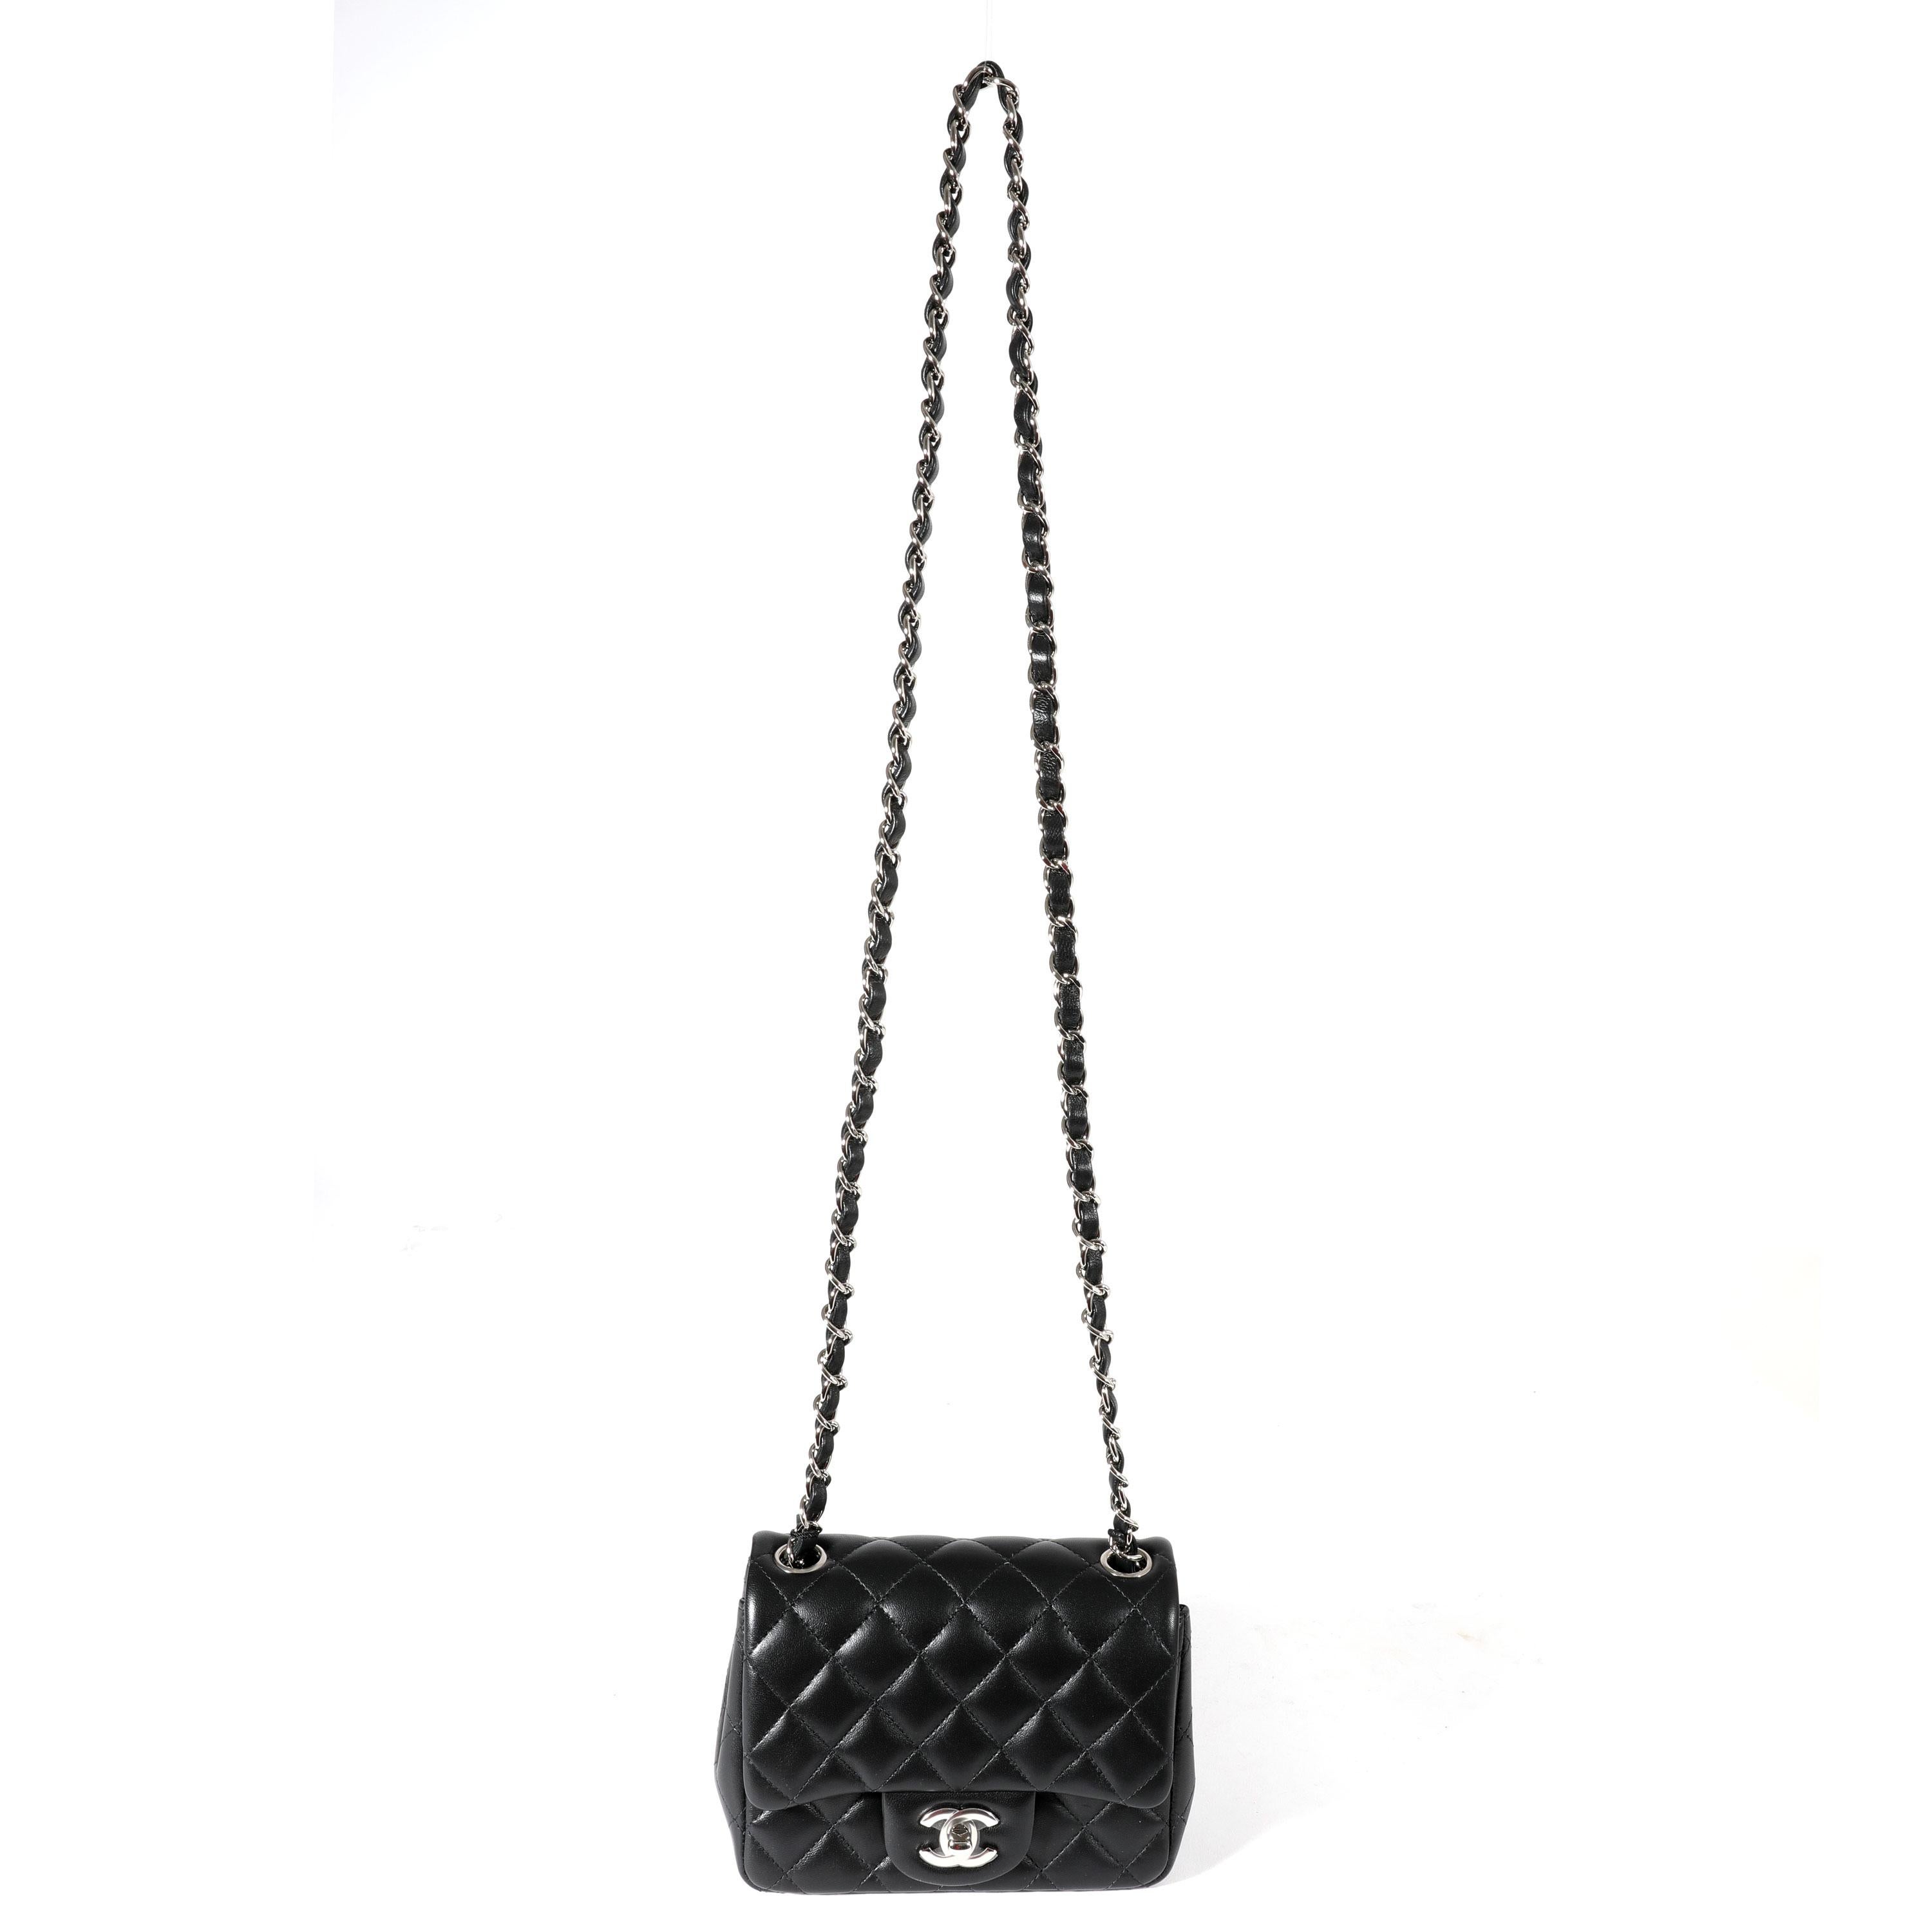 Listing Title: Chanel Black Quilted Lambskin Mini Square Classic Flap Bag
SKU: 123034
Condition: Pre-owned 
Handbag Condition: Mint
Condition Comments: Mint Condition. Plastic at some hardware. No visible signs of wear.  Final sale.
Brand: